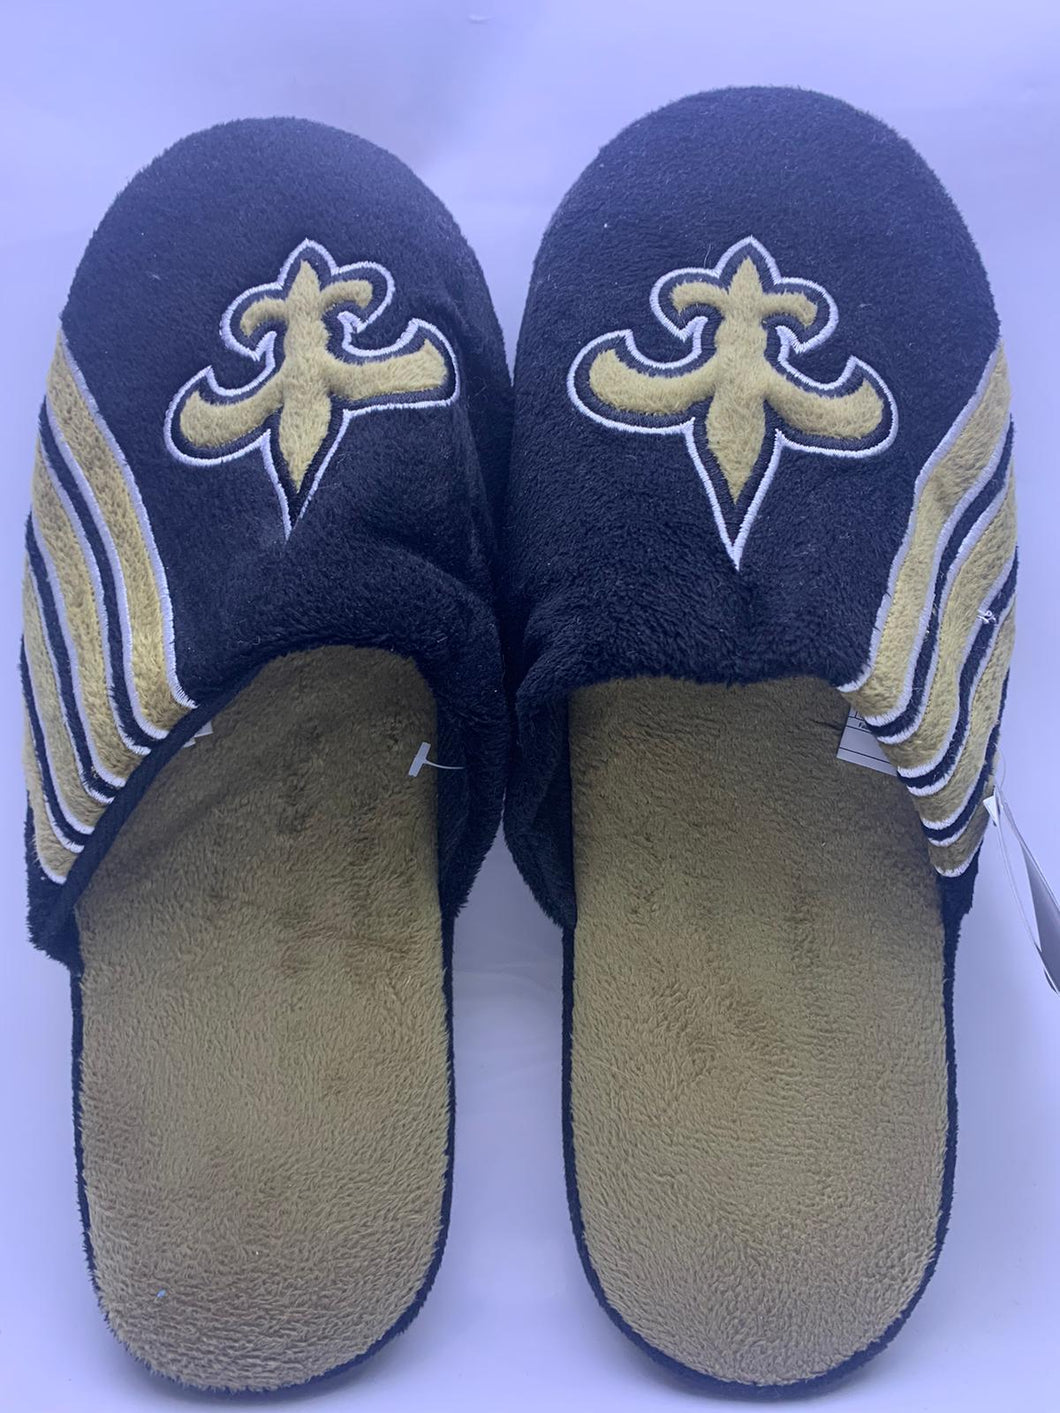 New Orleans Saints Slippers